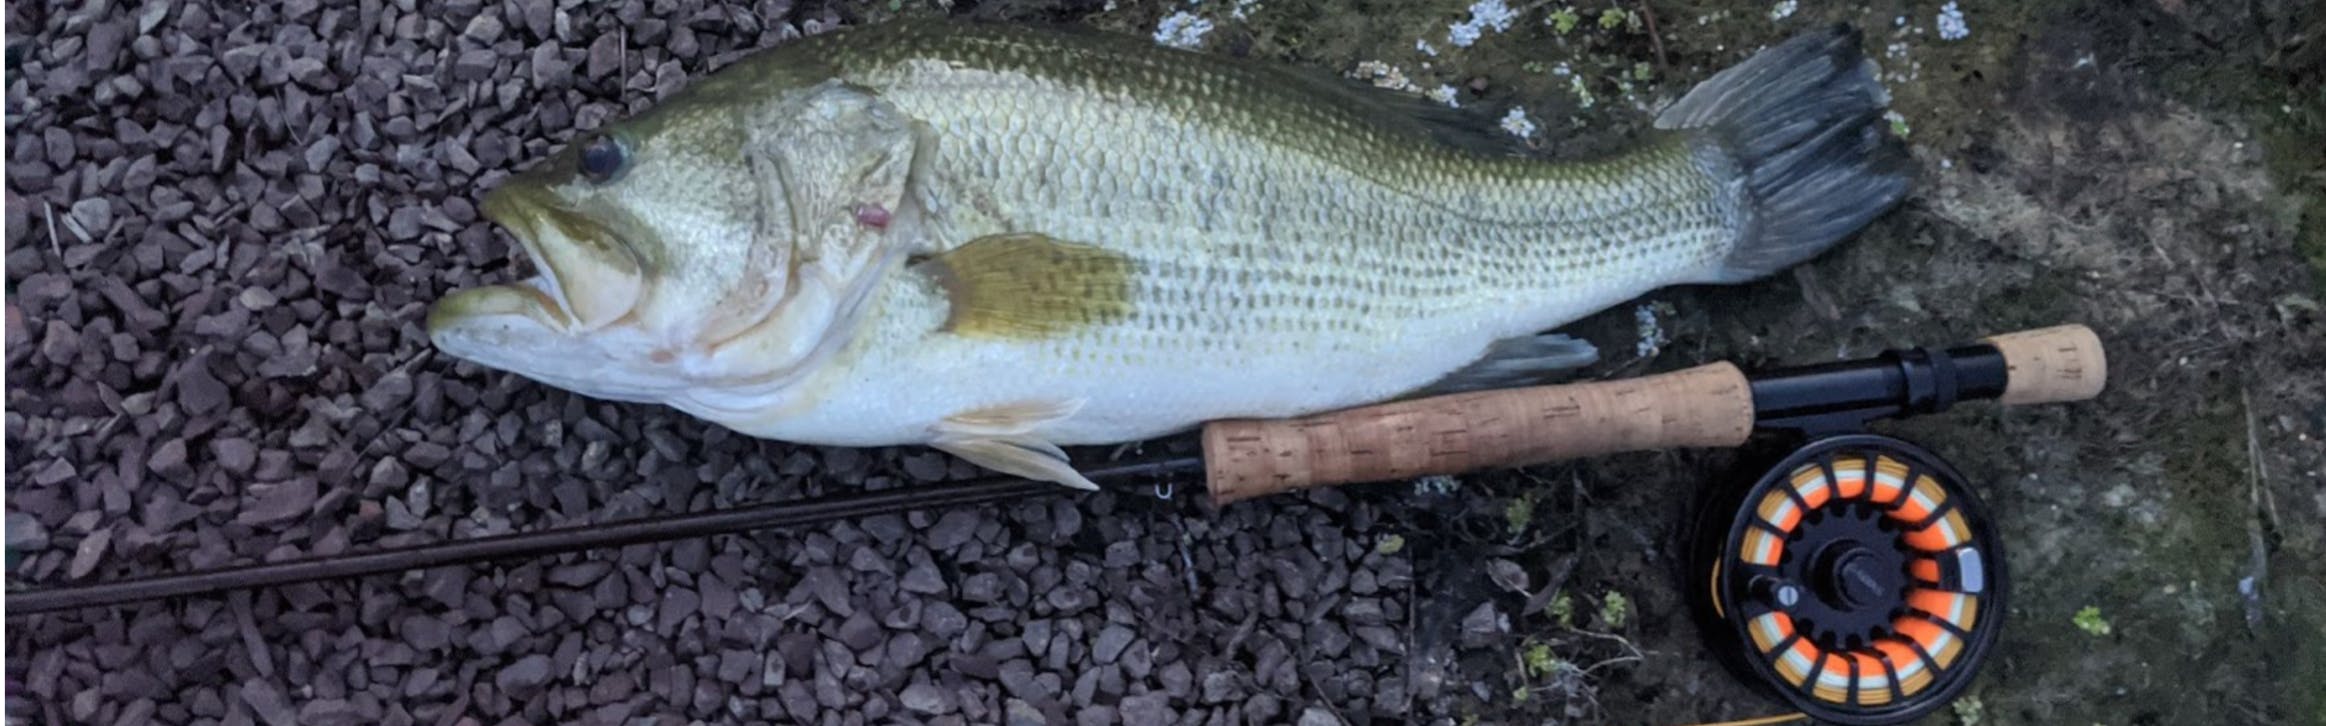 Bass on a fly is an angling treat